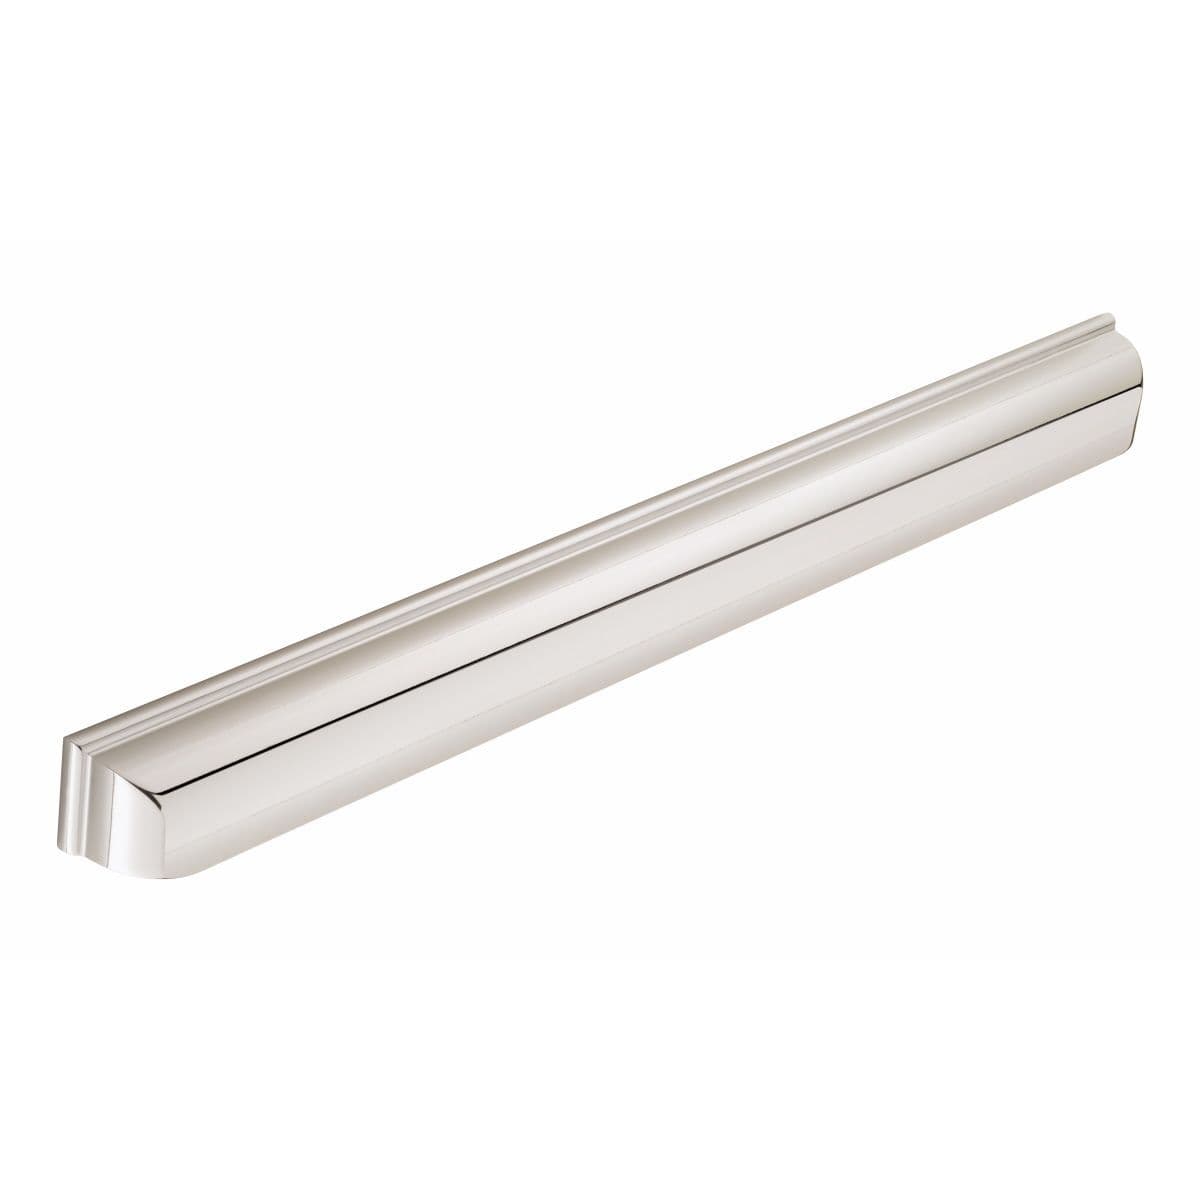 FENWICK SQUARE ELONGATED CUP Cupboard Handle - 320mm h/c size - 2 finishes (PWS H1122.320)